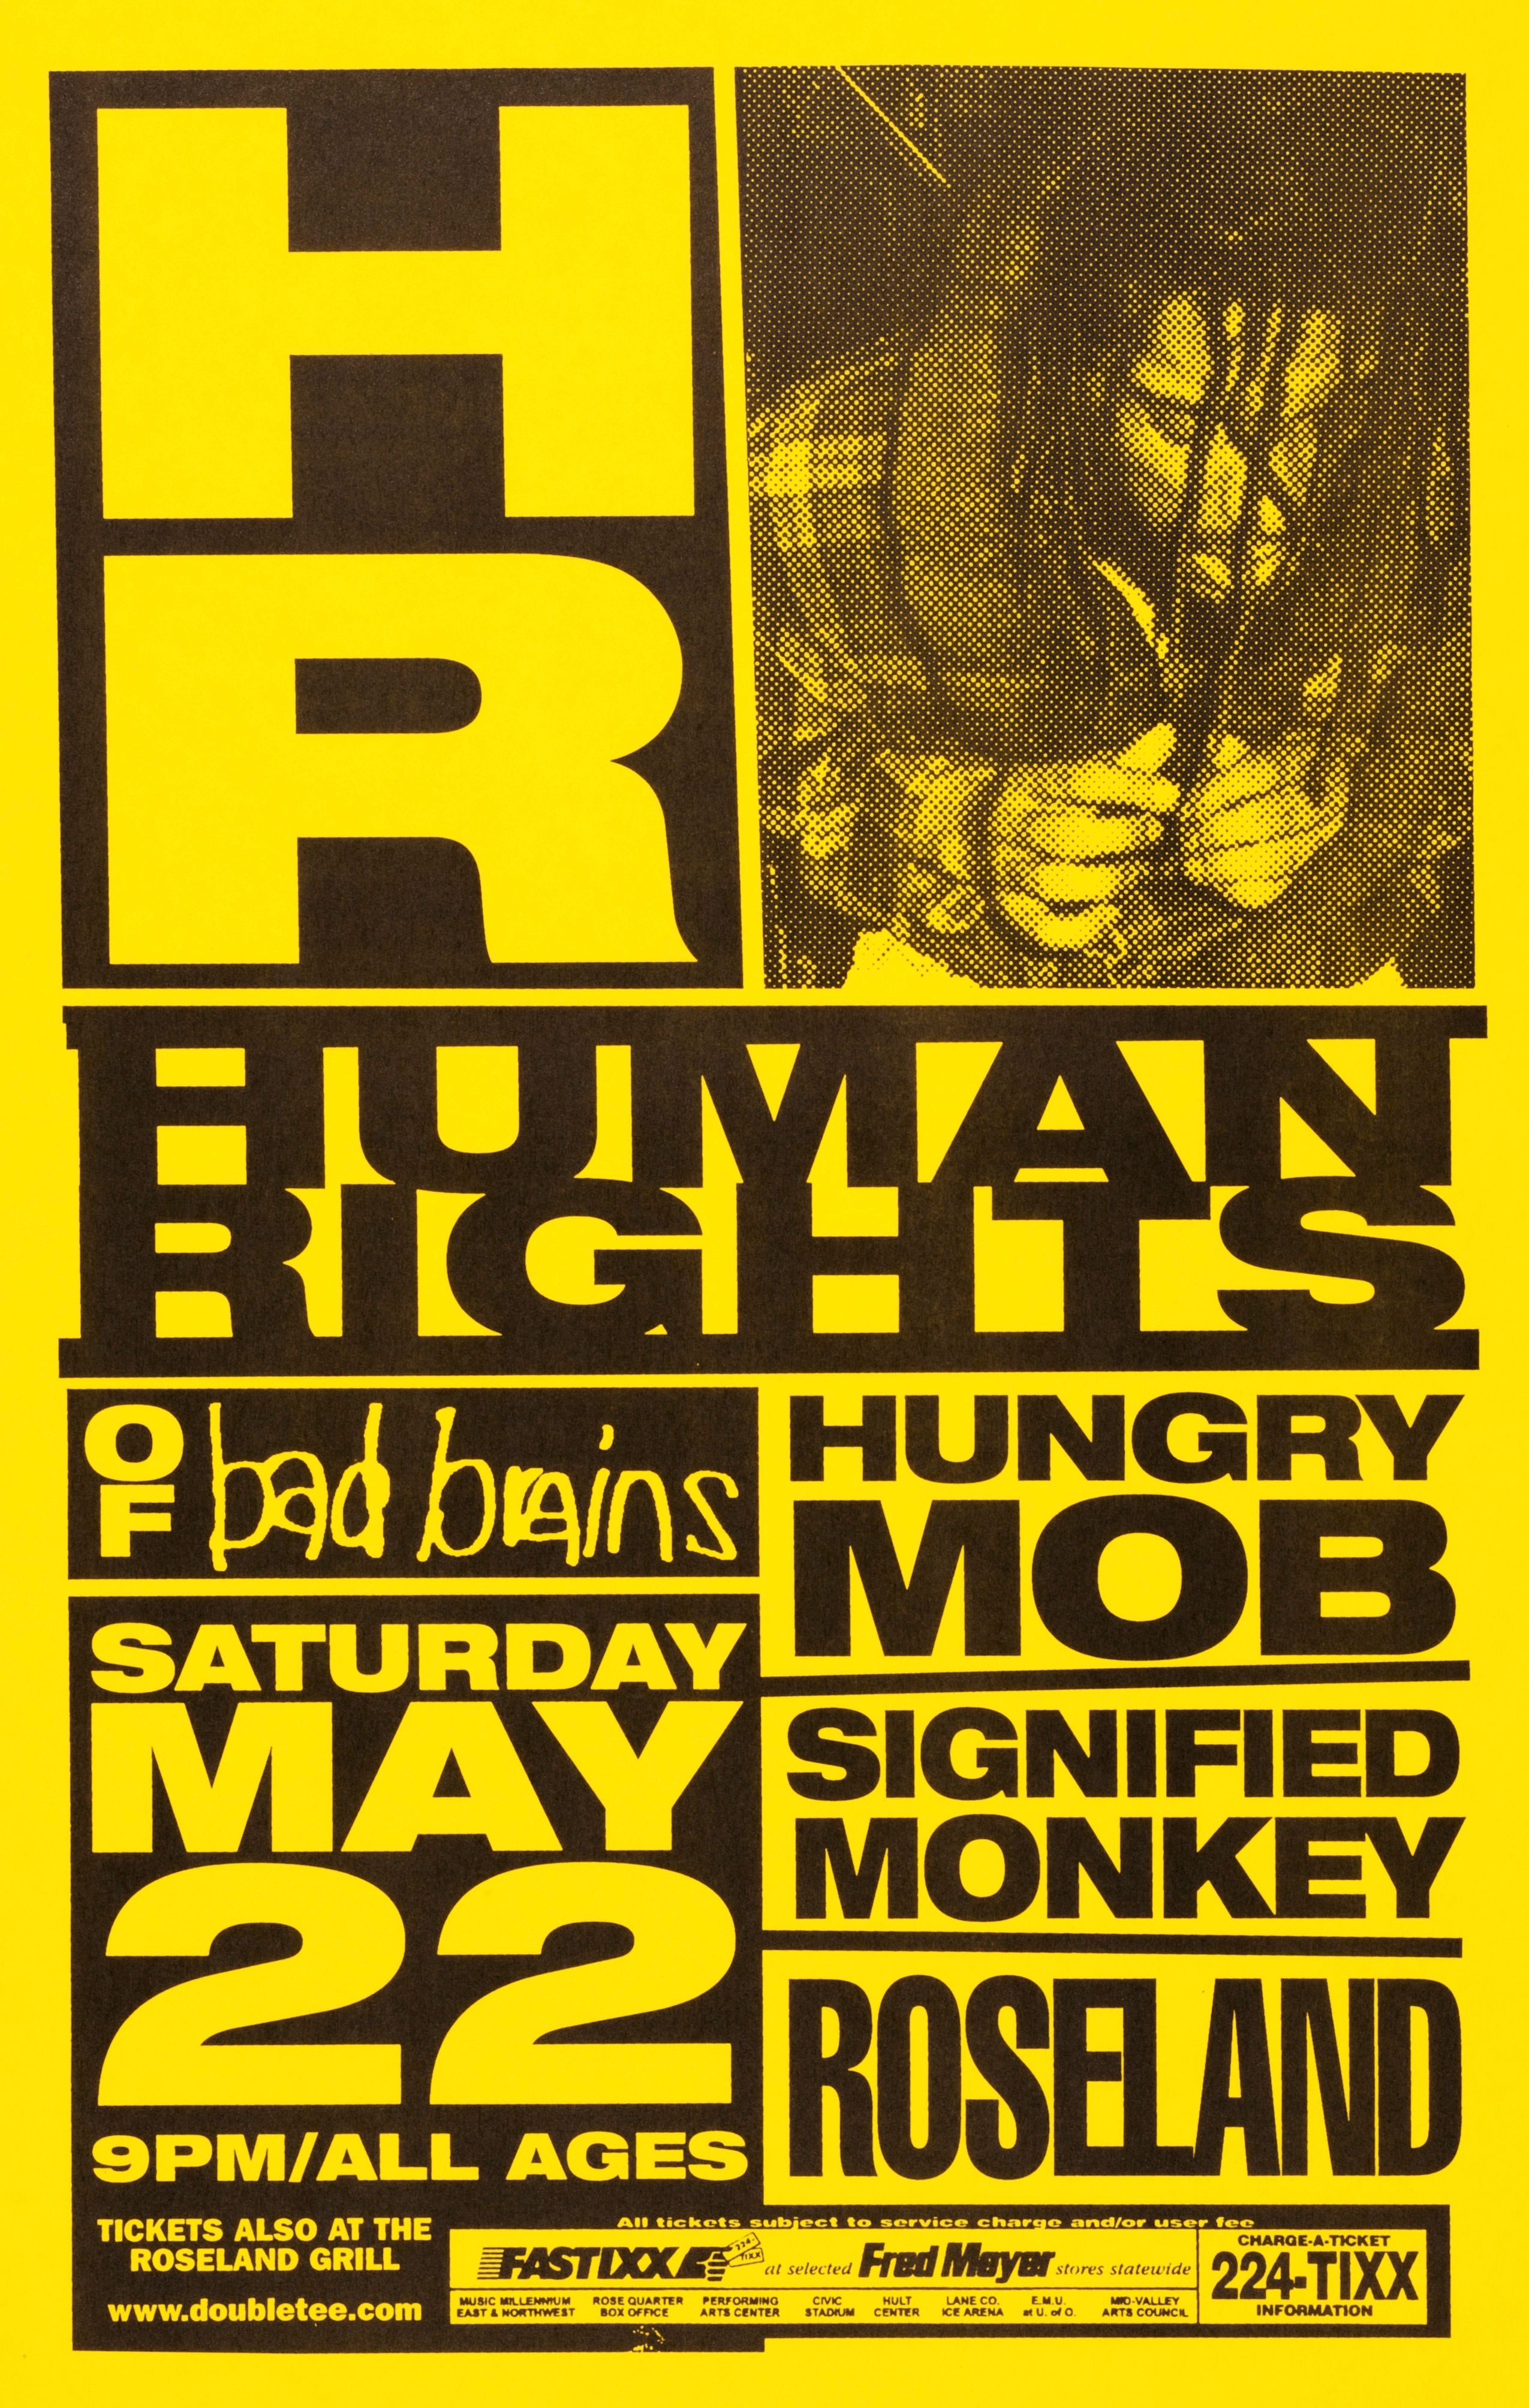 MXP-223.2 Hr (human Rights) 2004 Roseland Theater  May 22 Concert Poster